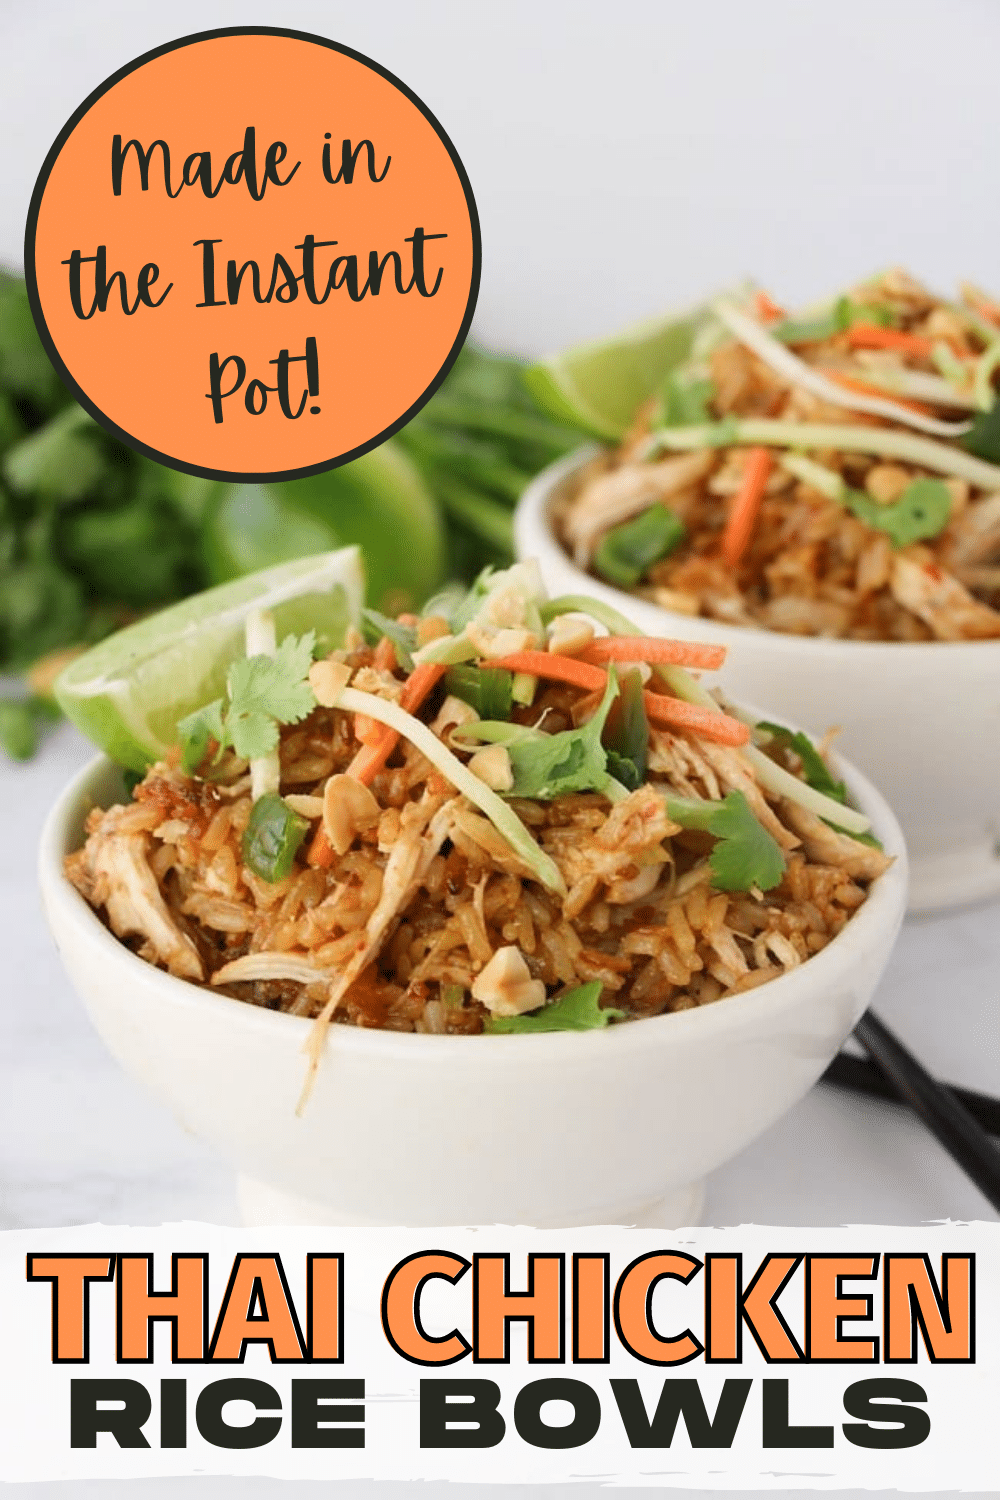 These Instant Pot Thai Chicken Rice Bowls are packed with traditional Thai flavors and unbelievably easy to make. Perfect for dinner or lunch! #instantpot #pressurecooker #thaifood #chicken #ricebowls via @wondermomwannab